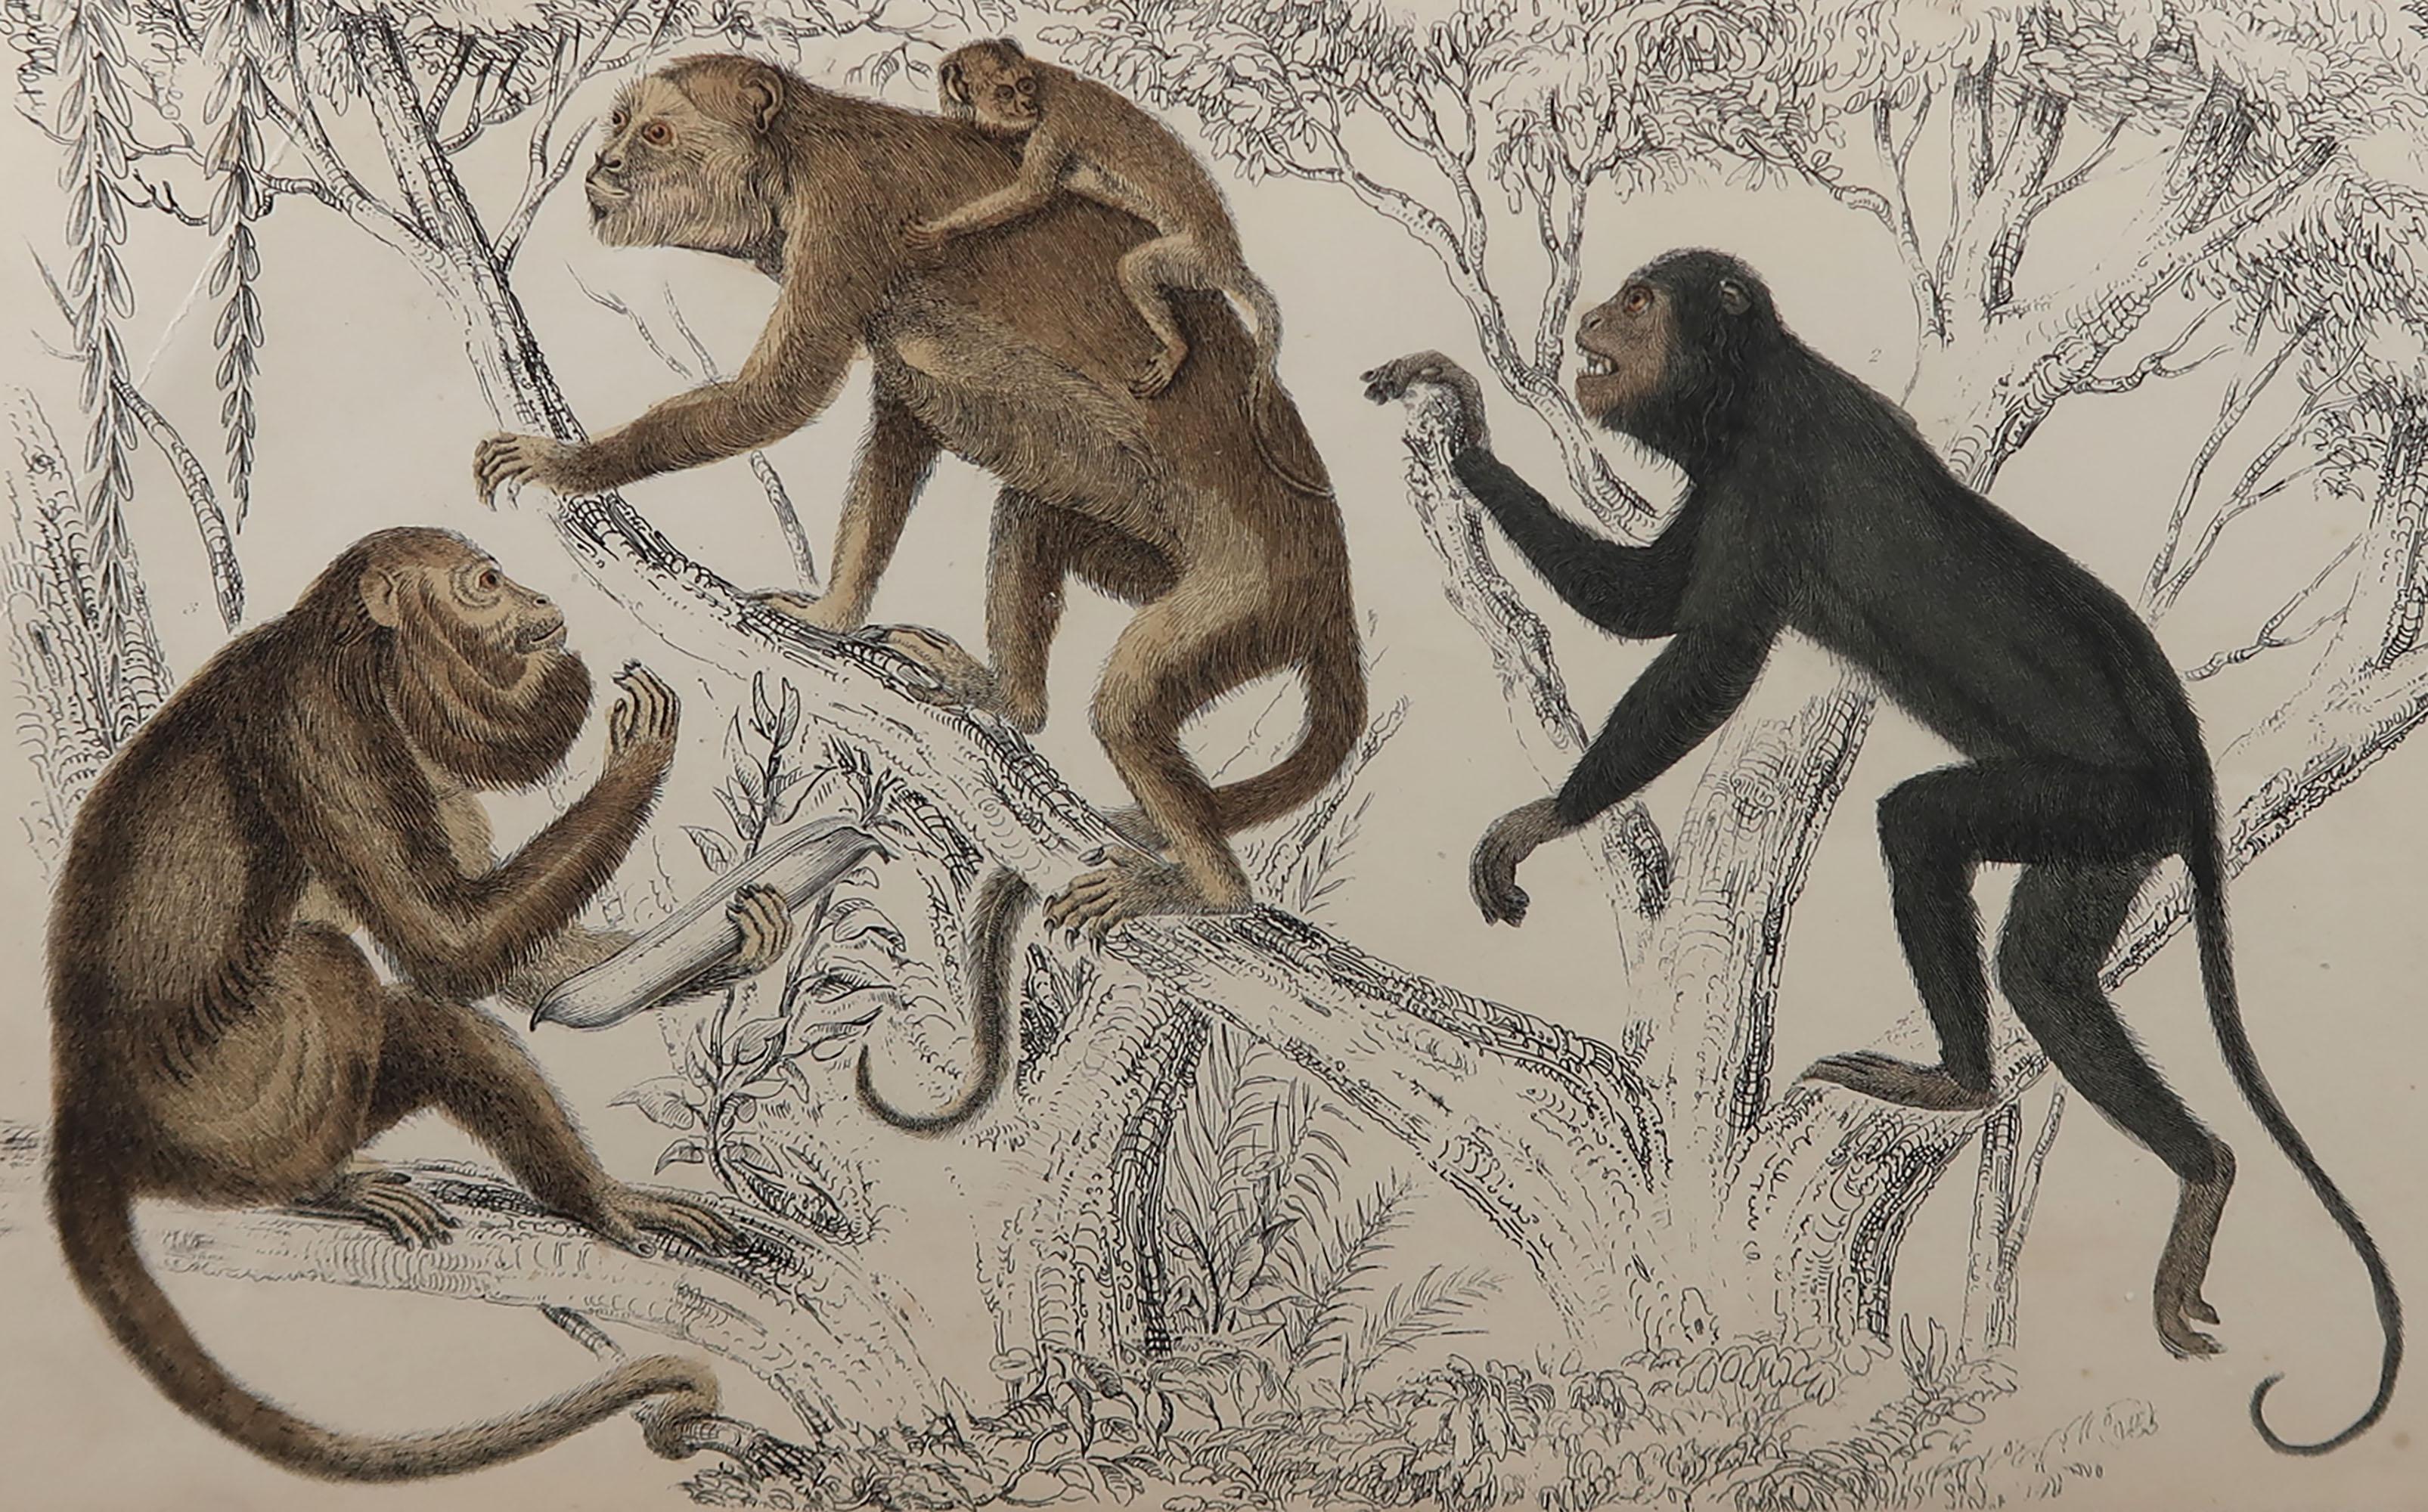 Great image of monkeys.

Unframed. It gives you the option of perhaps making a set up using your own choice of frames.

Lithograph after Cpt. Brown with original hand color.

Published, 1847.

Creased to top left and repairs to some minor